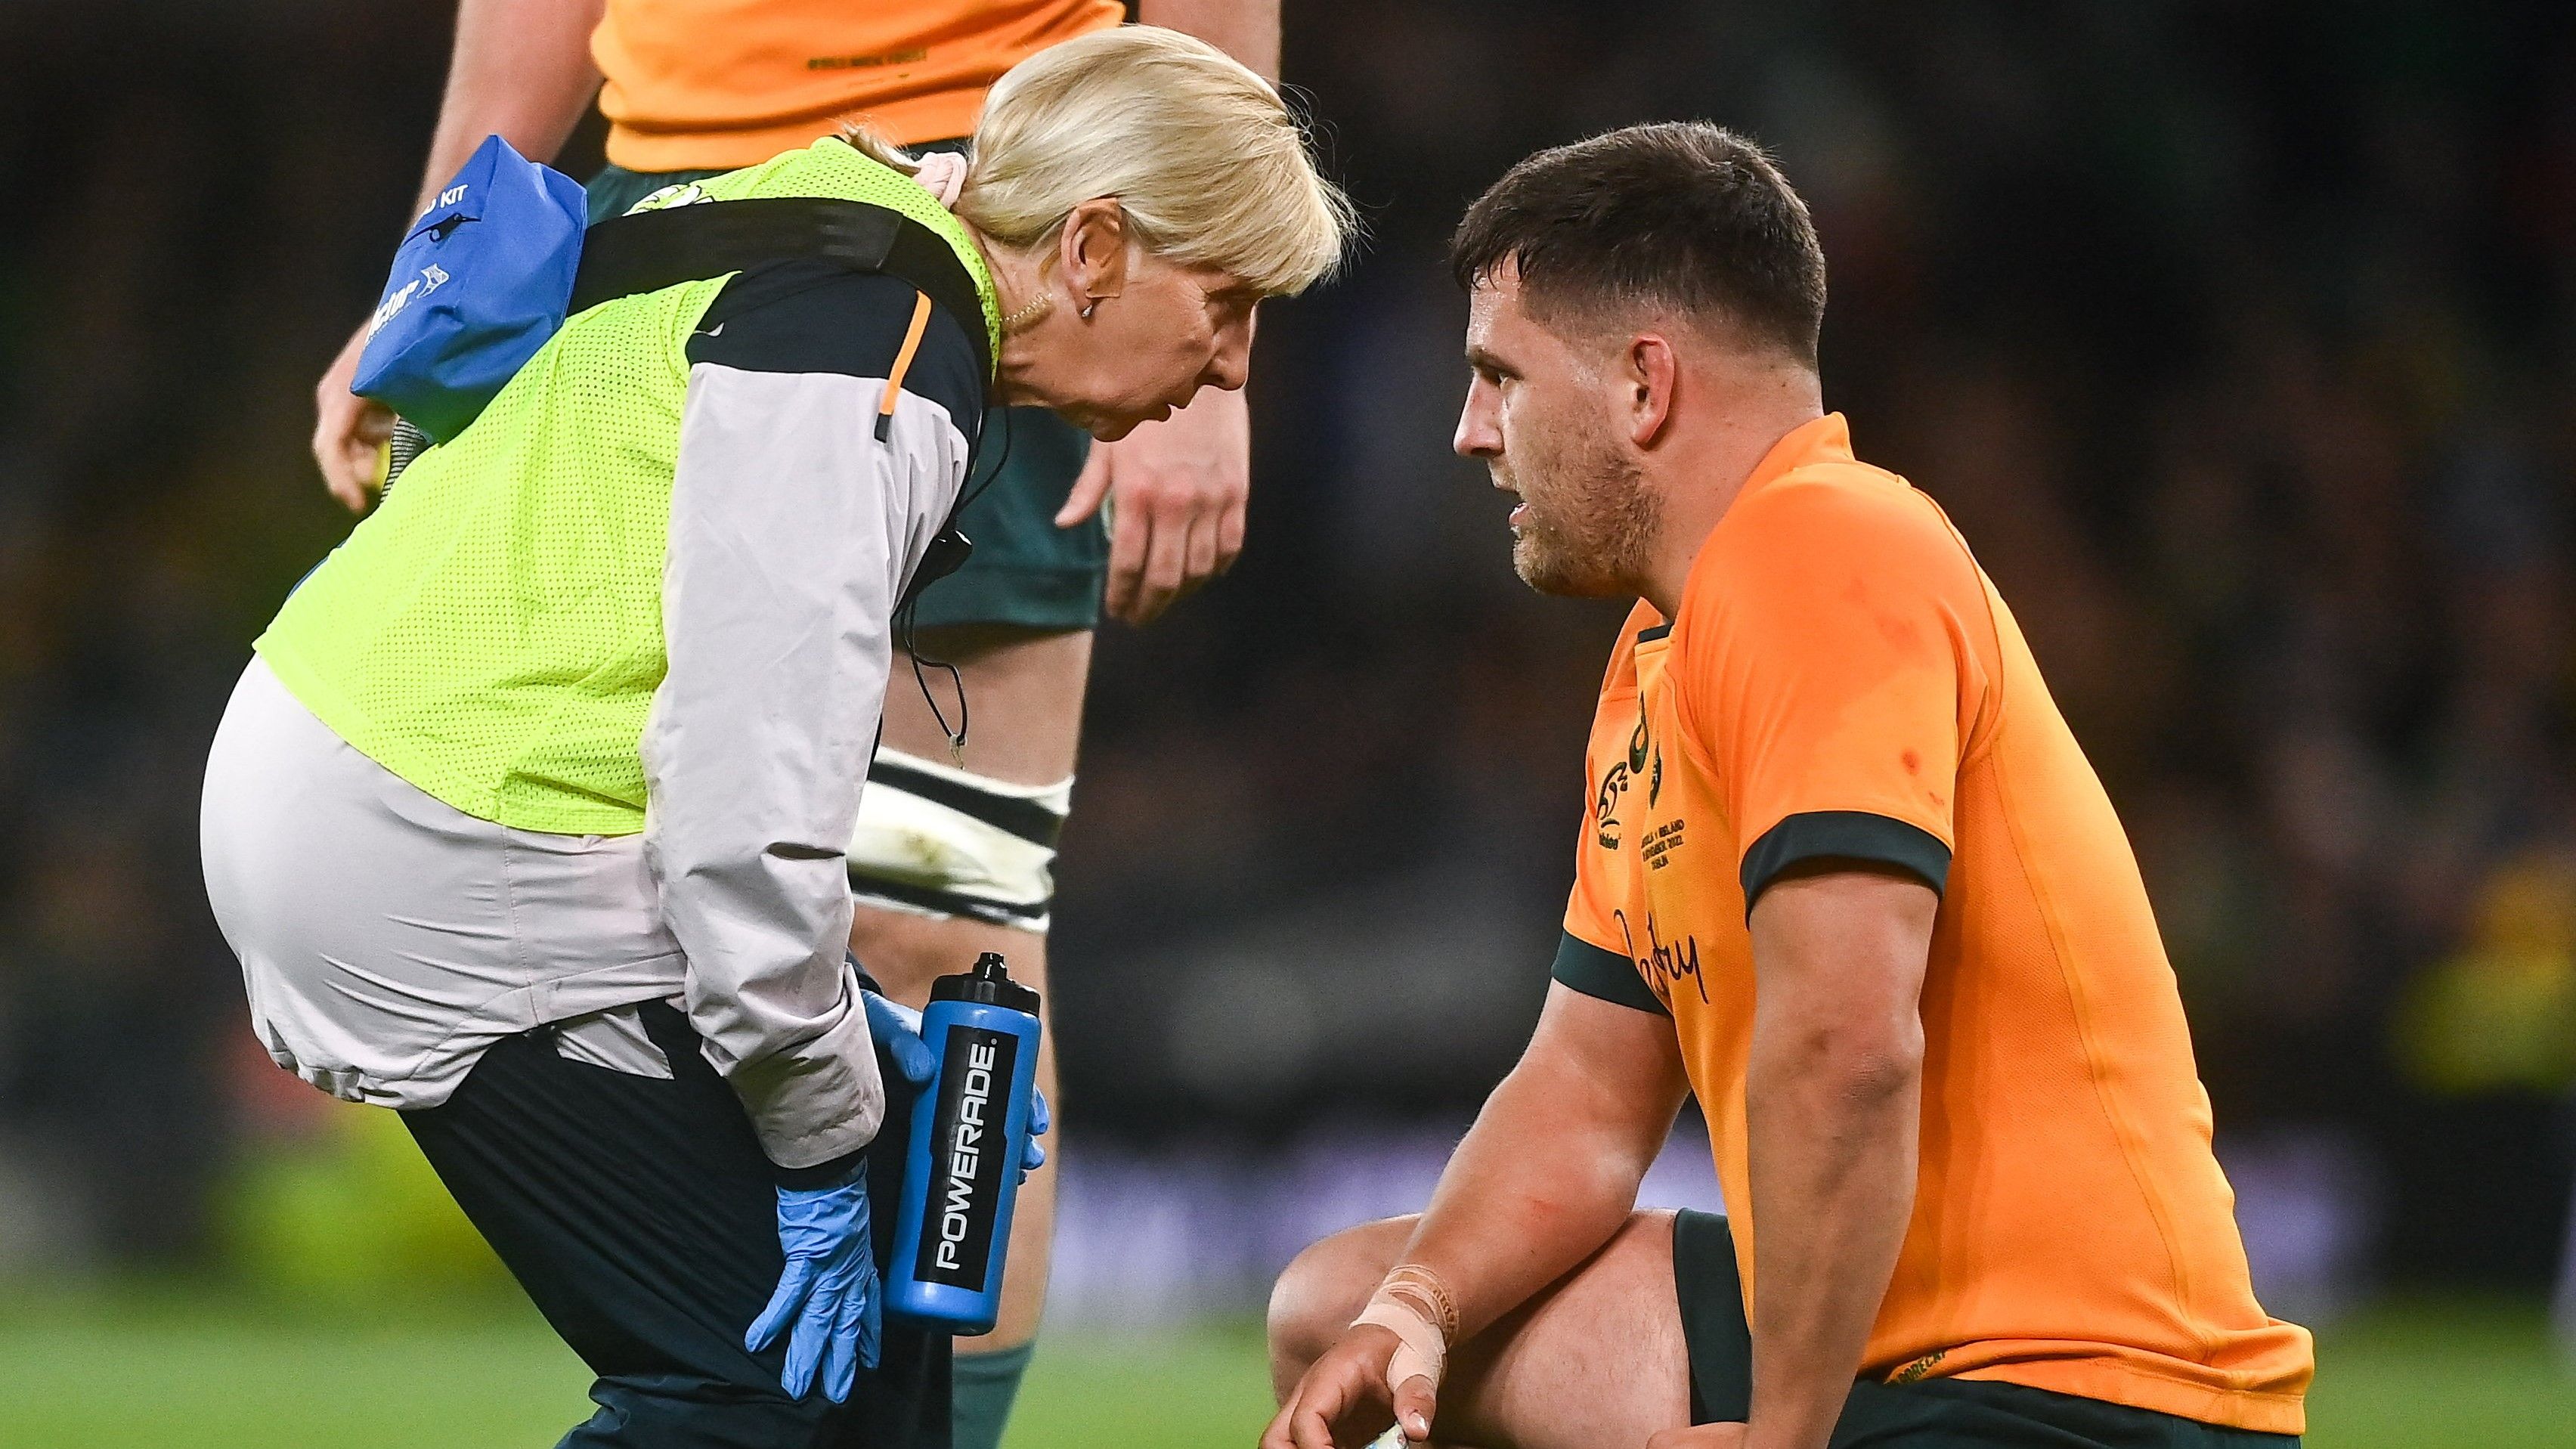 David Porecki receives medical attention, before being substituted off, during in the match between Australia and Ireland.